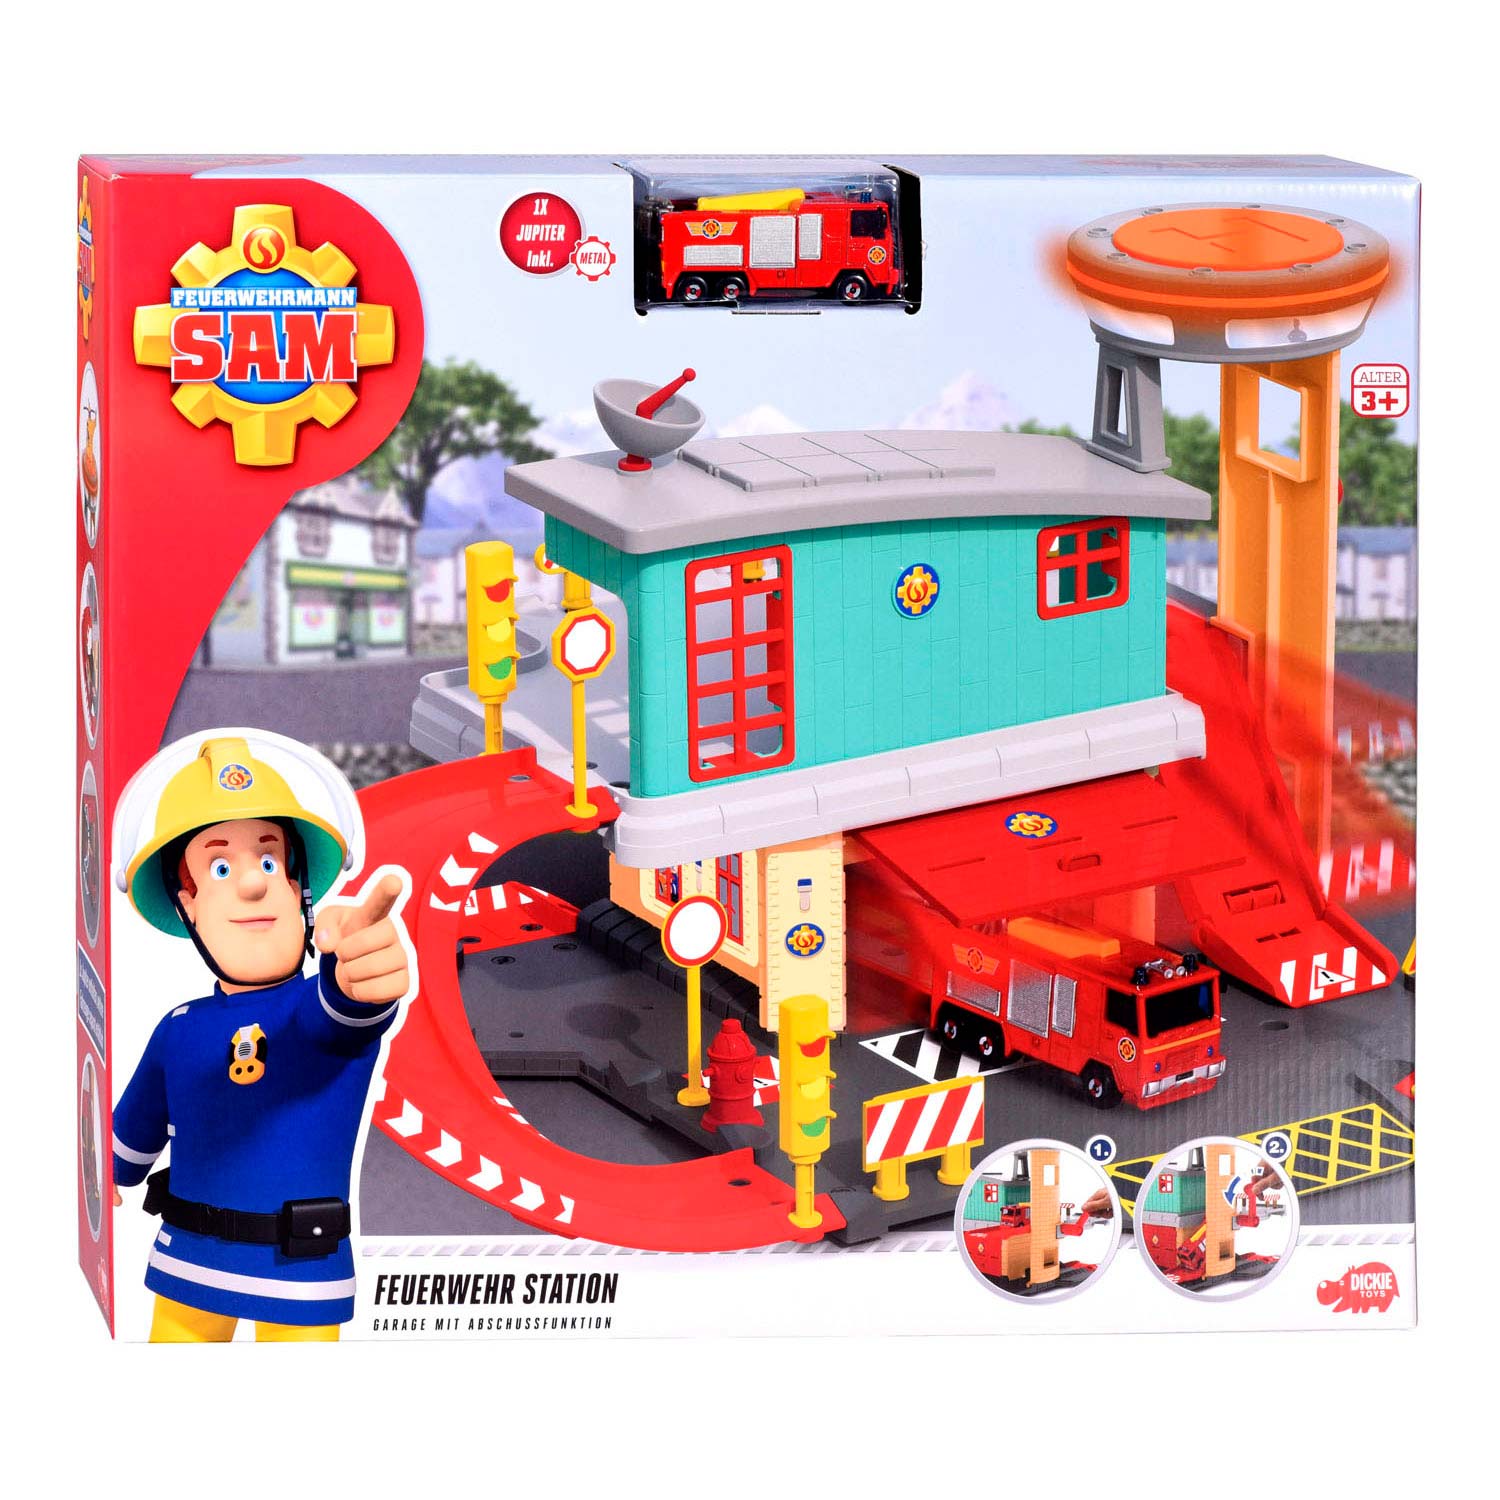 Firefighter Sam Fire Station | Thimble Toys